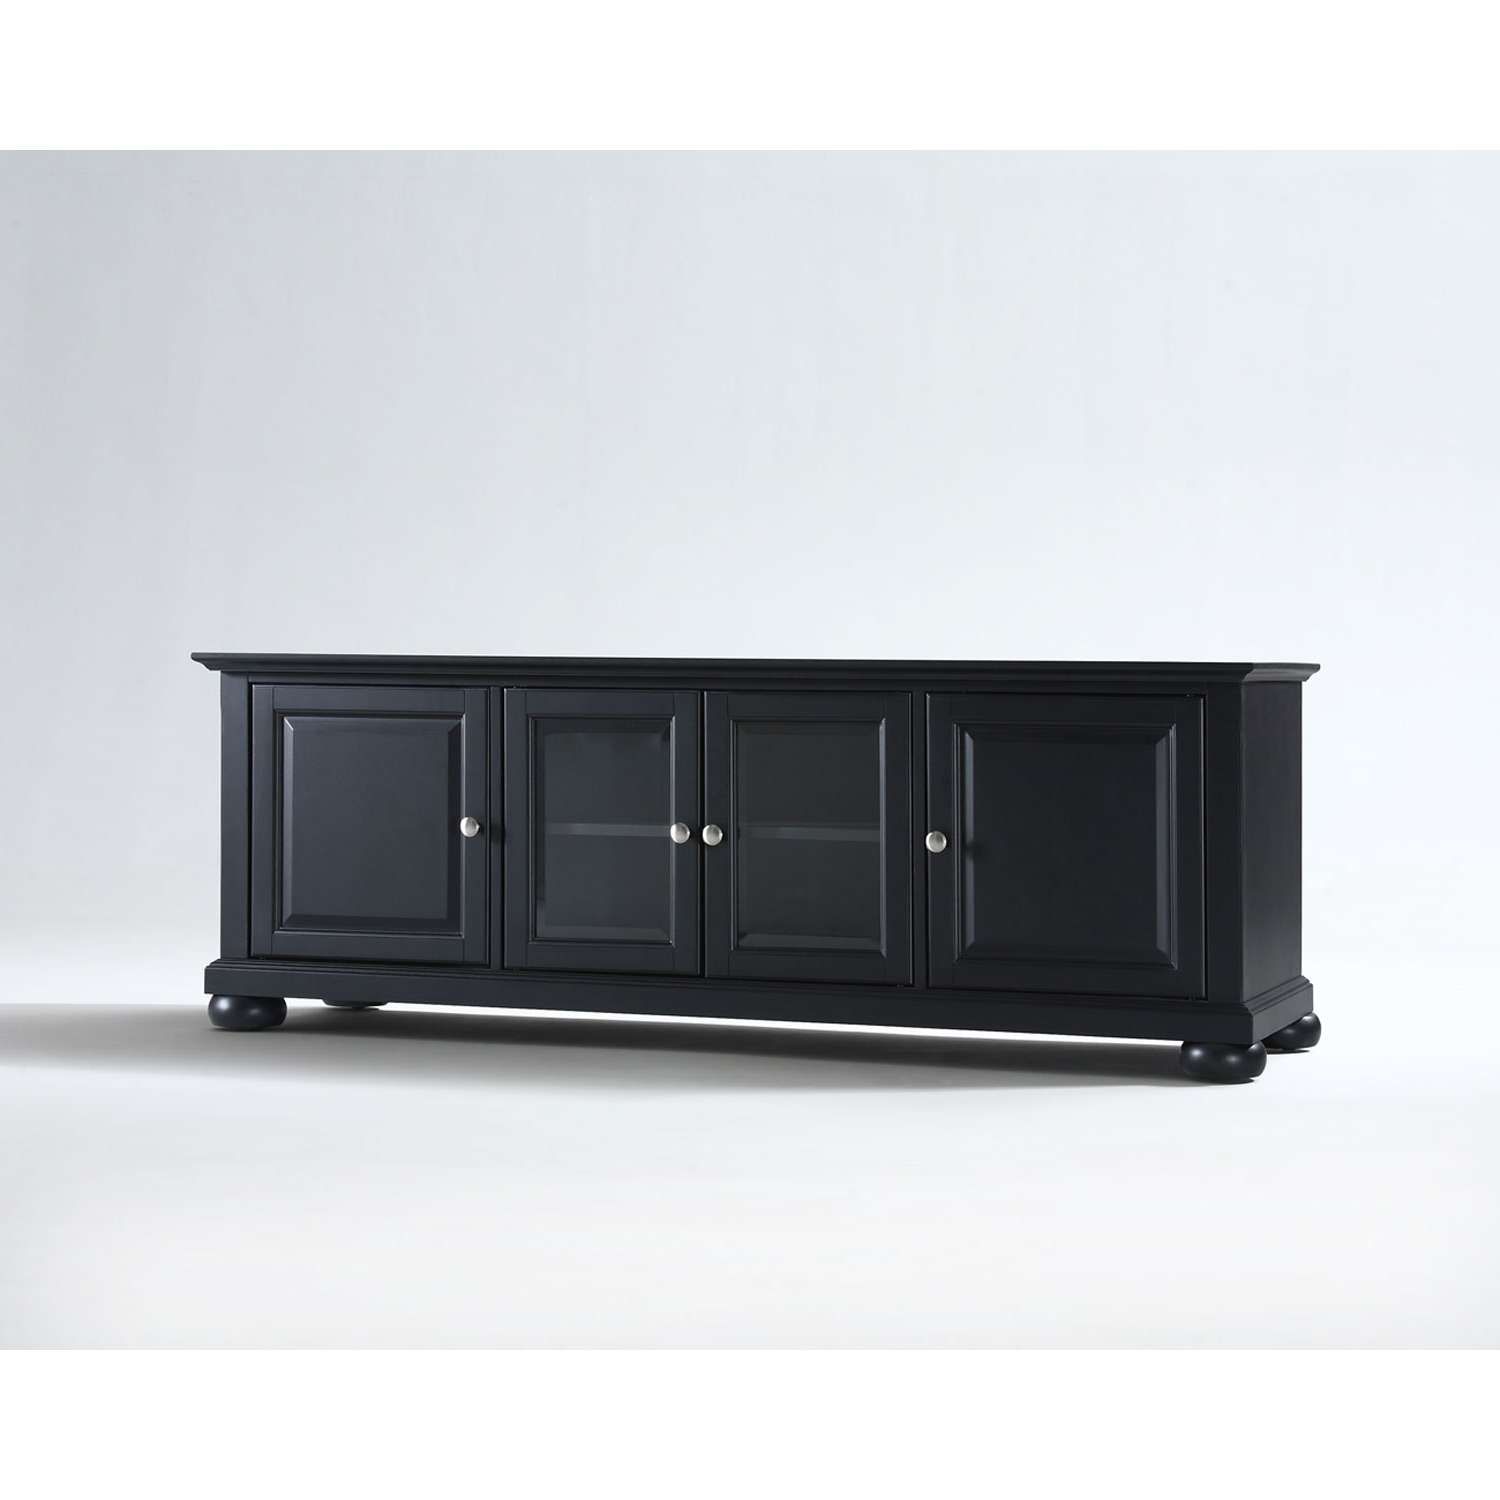 Tv Stands & Cabinets On Sale | Bellacor Intended For Modern Low Profile Tv Stands (View 8 of 15)